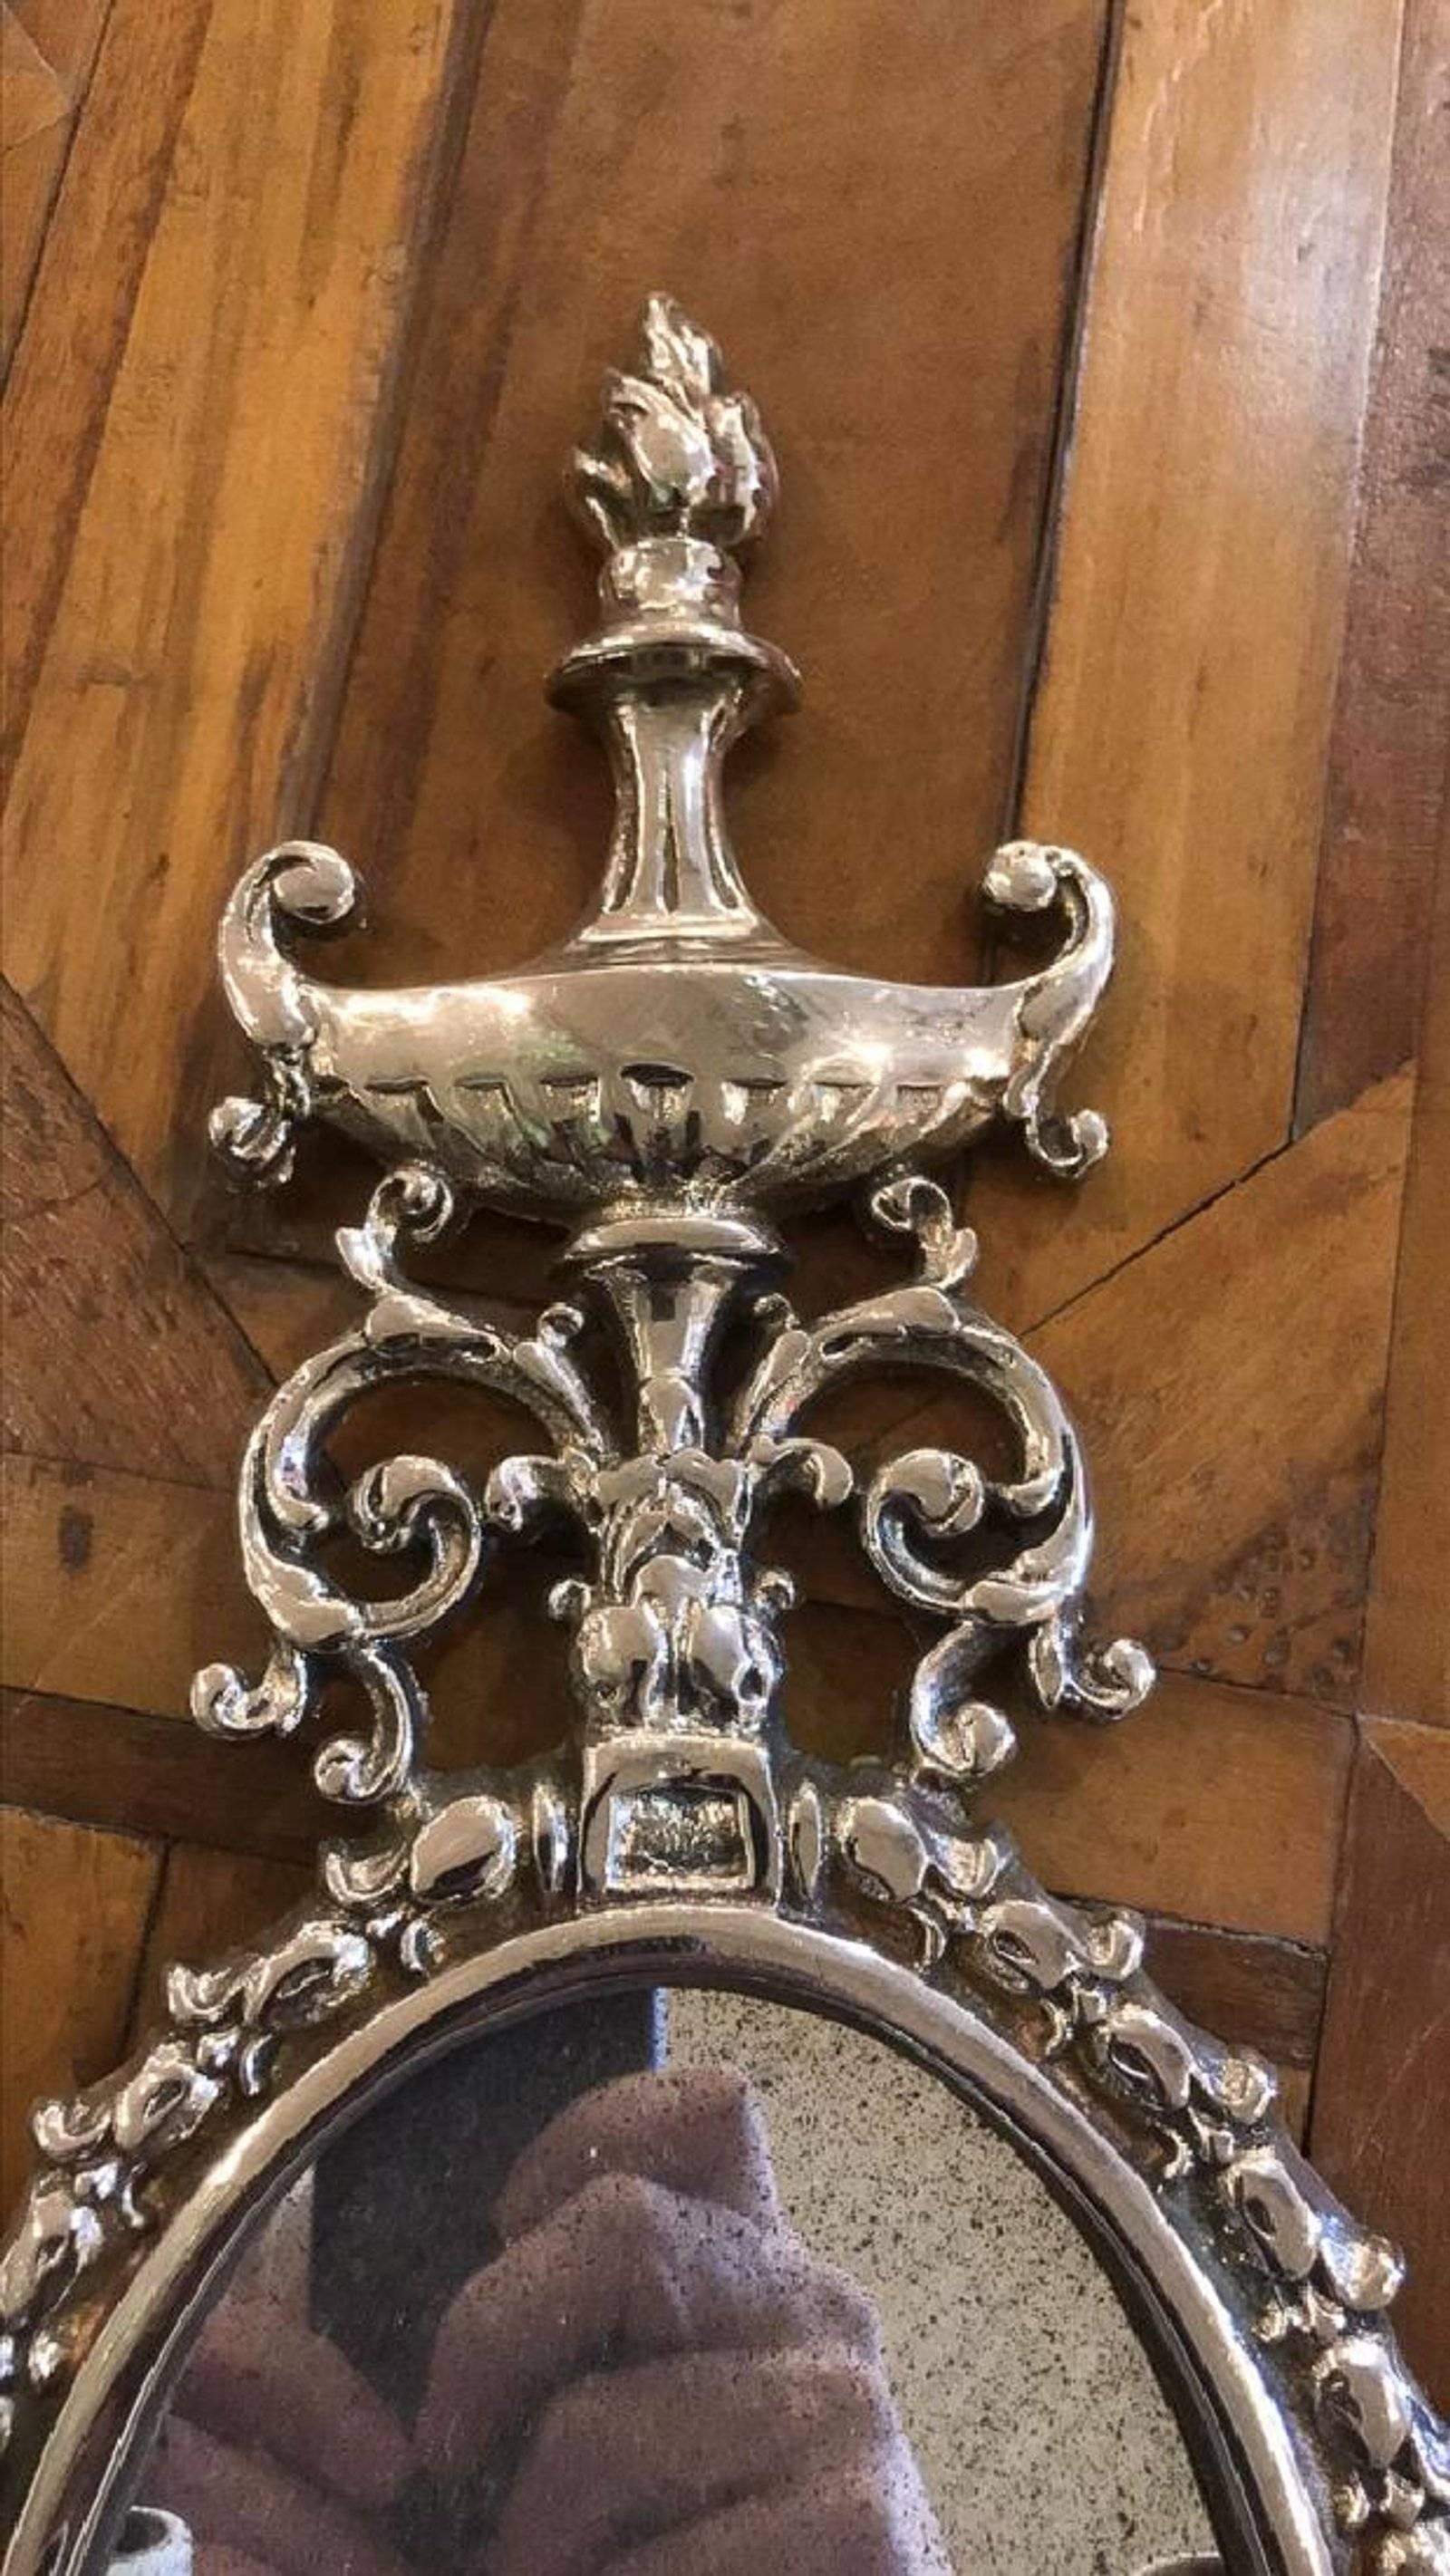 Uniquely styled French Classical chromium-plated two light wall sconces with urn, leaf scroll, tassel, and flame finial motif. Old mirror glass, recently electrified with new wax sleeves.